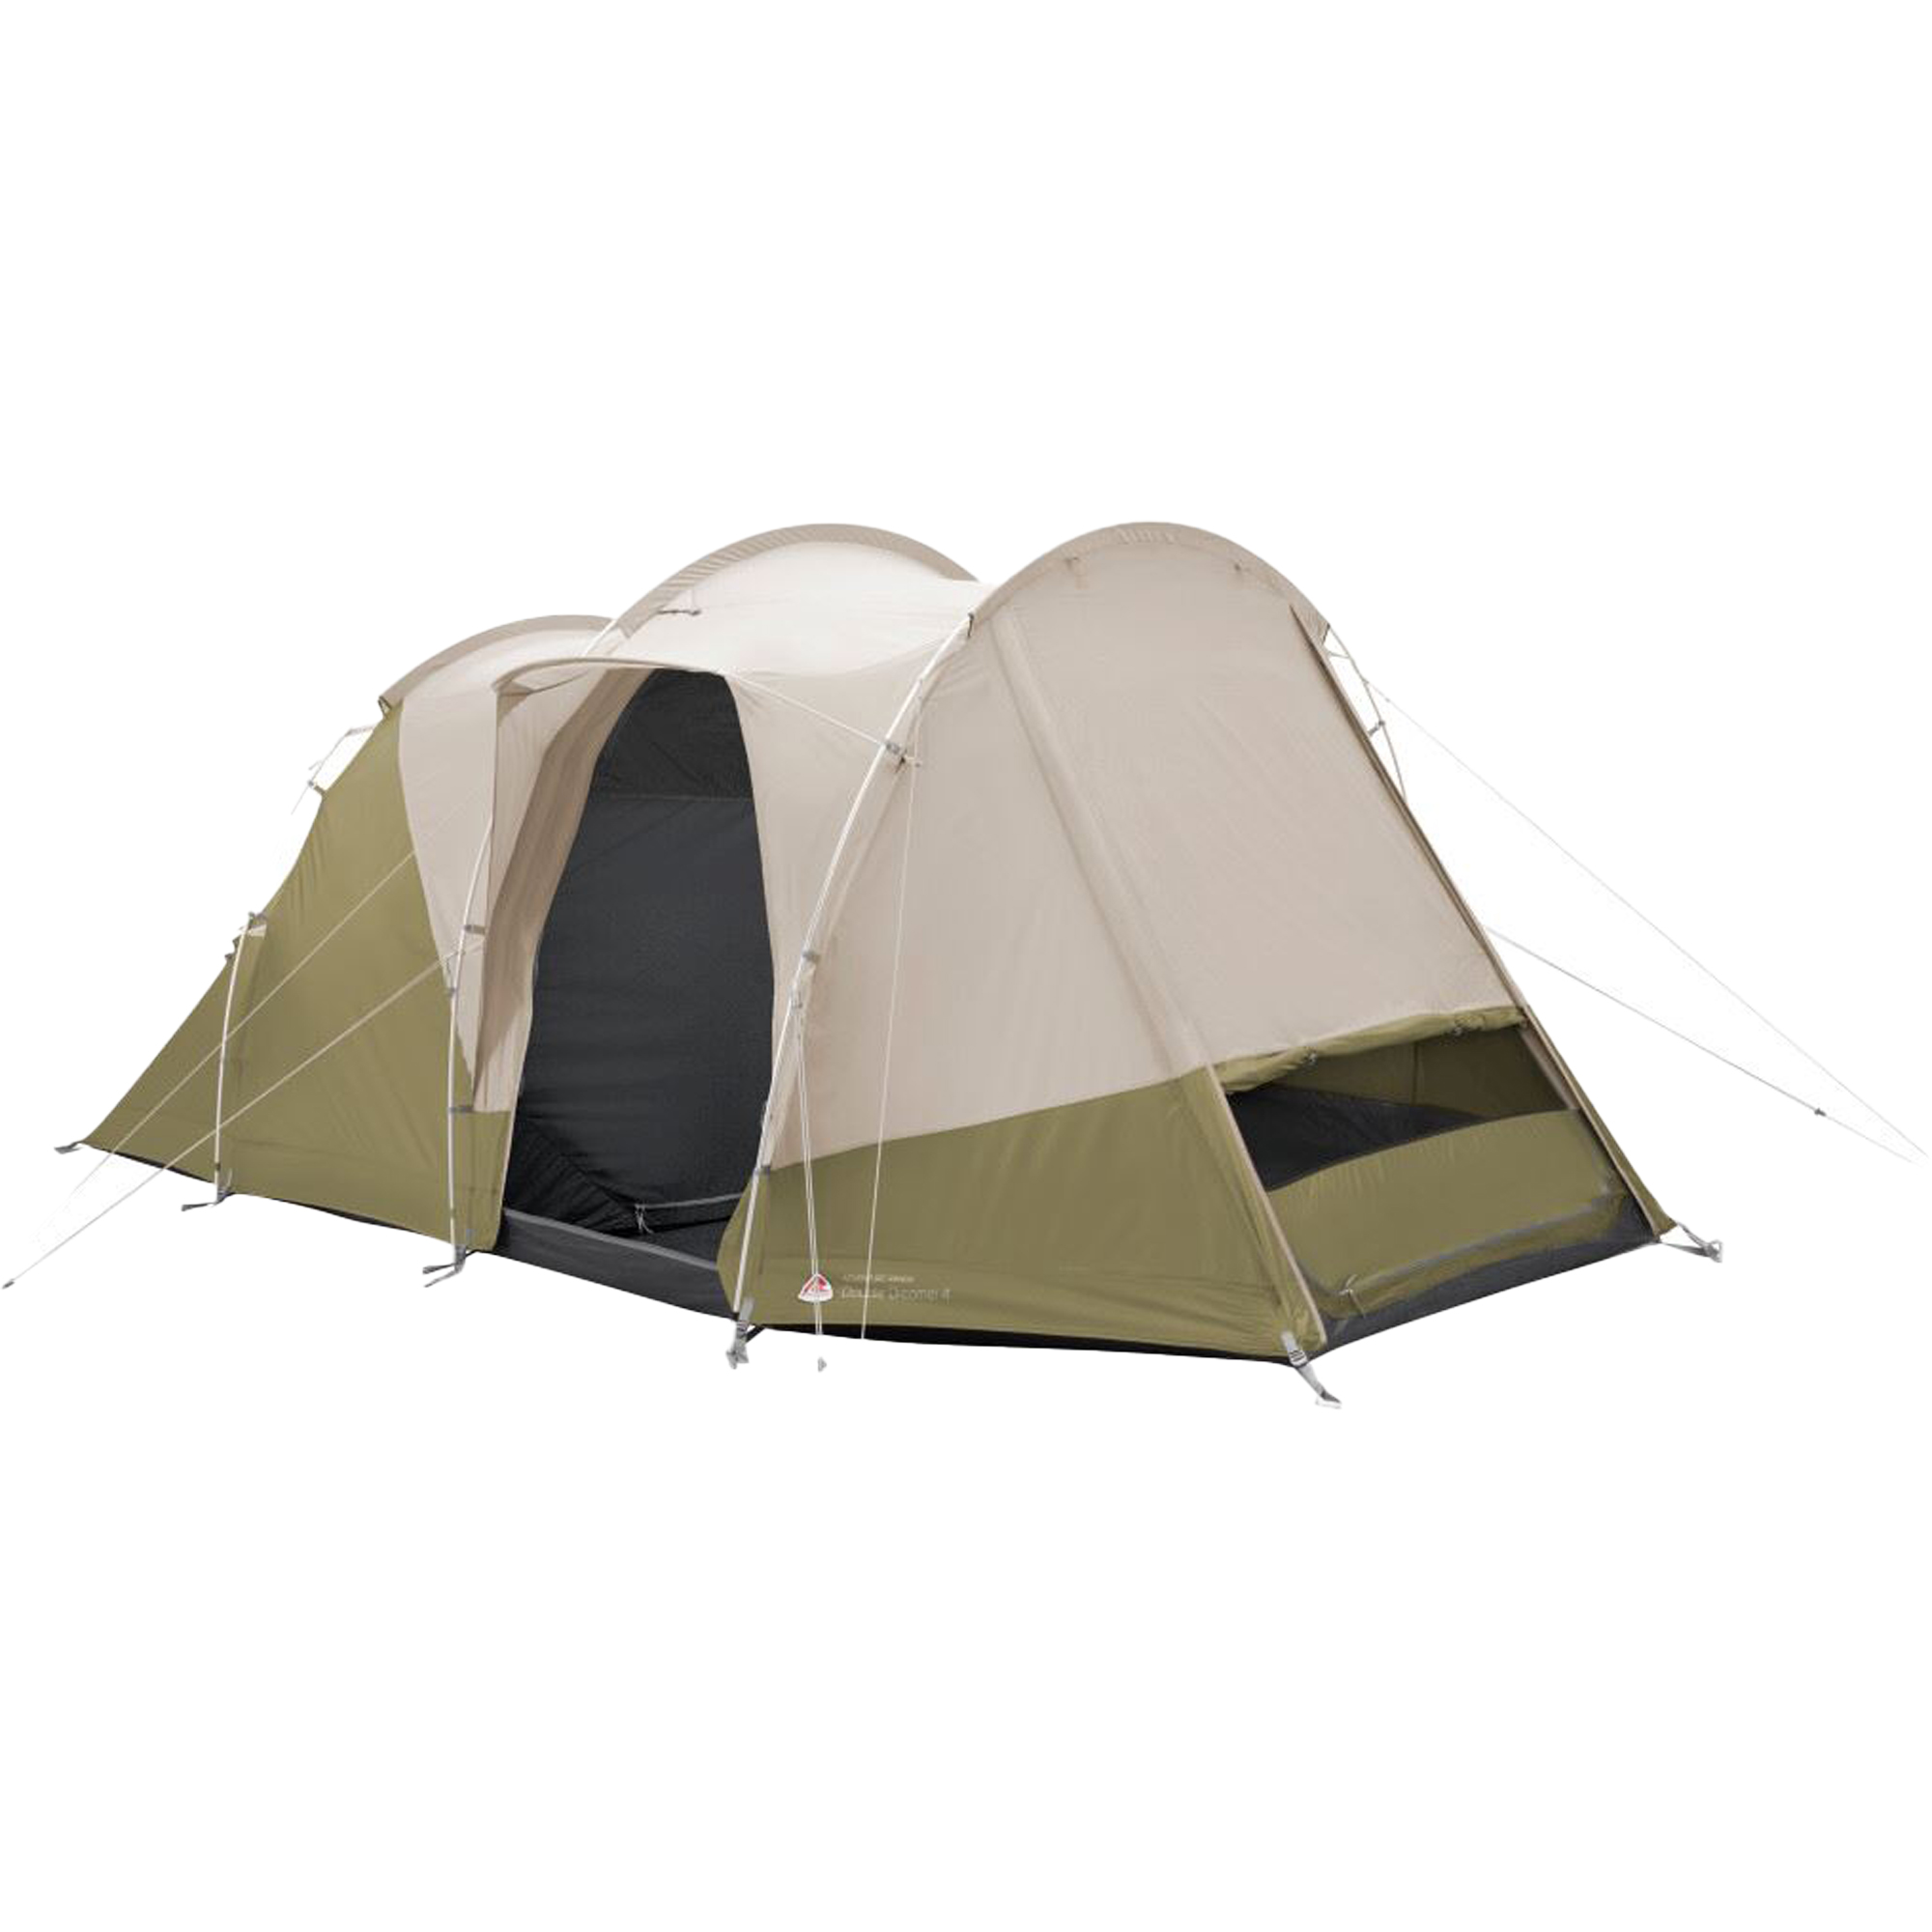 Robens Double Dreamer 4 Family Camping Tent